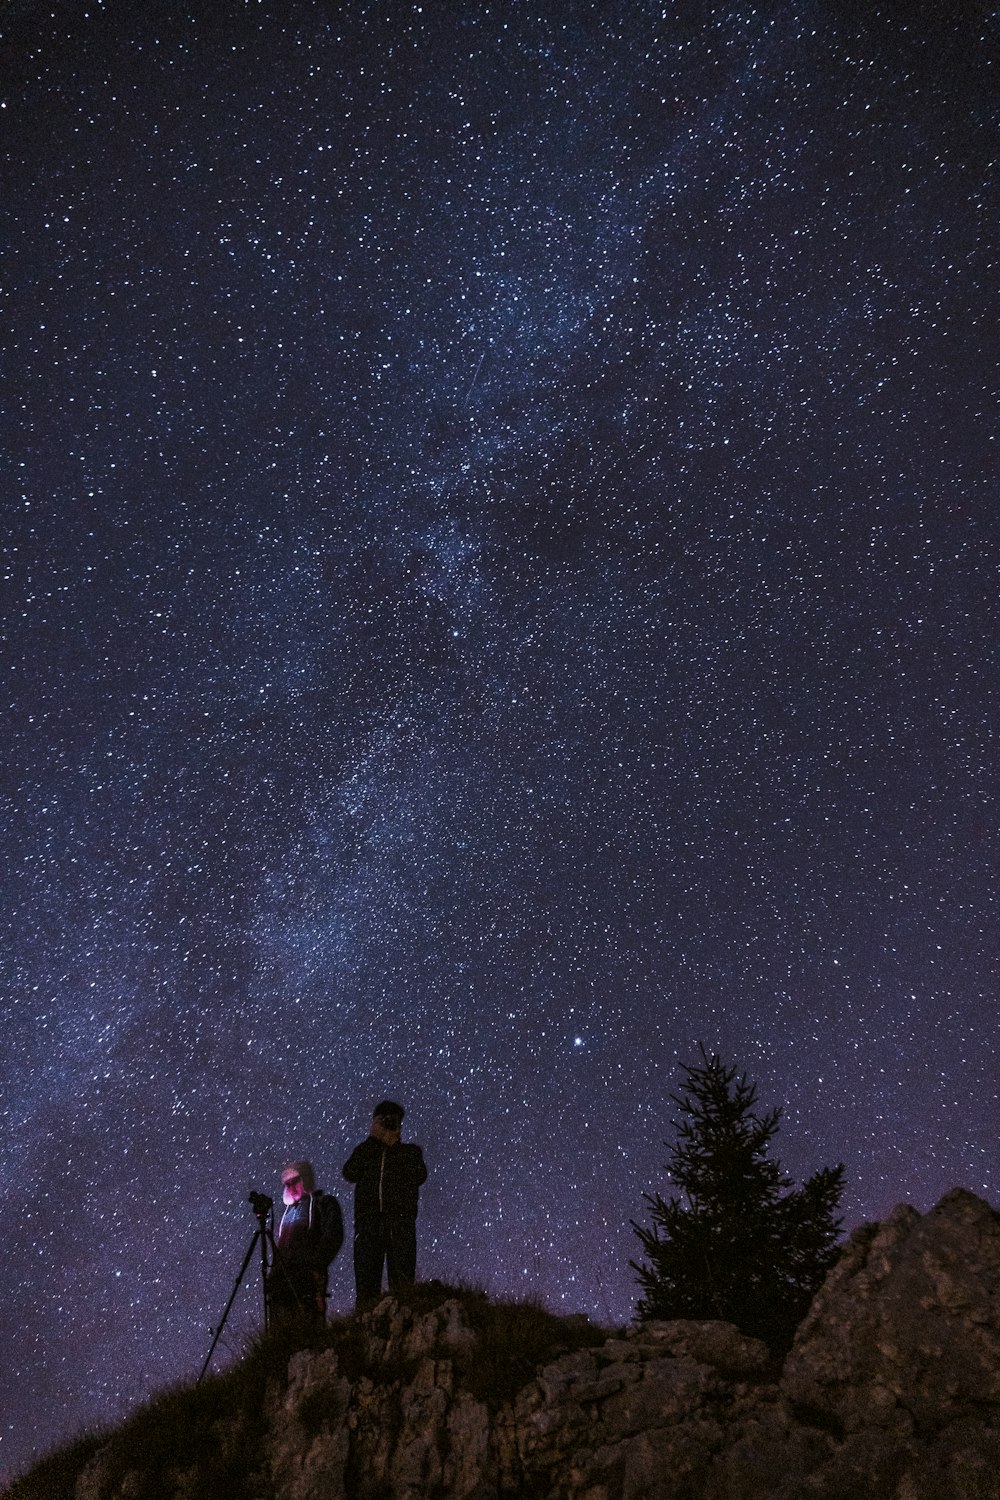 a man and woman standing on a rocky hill with a starry sky above